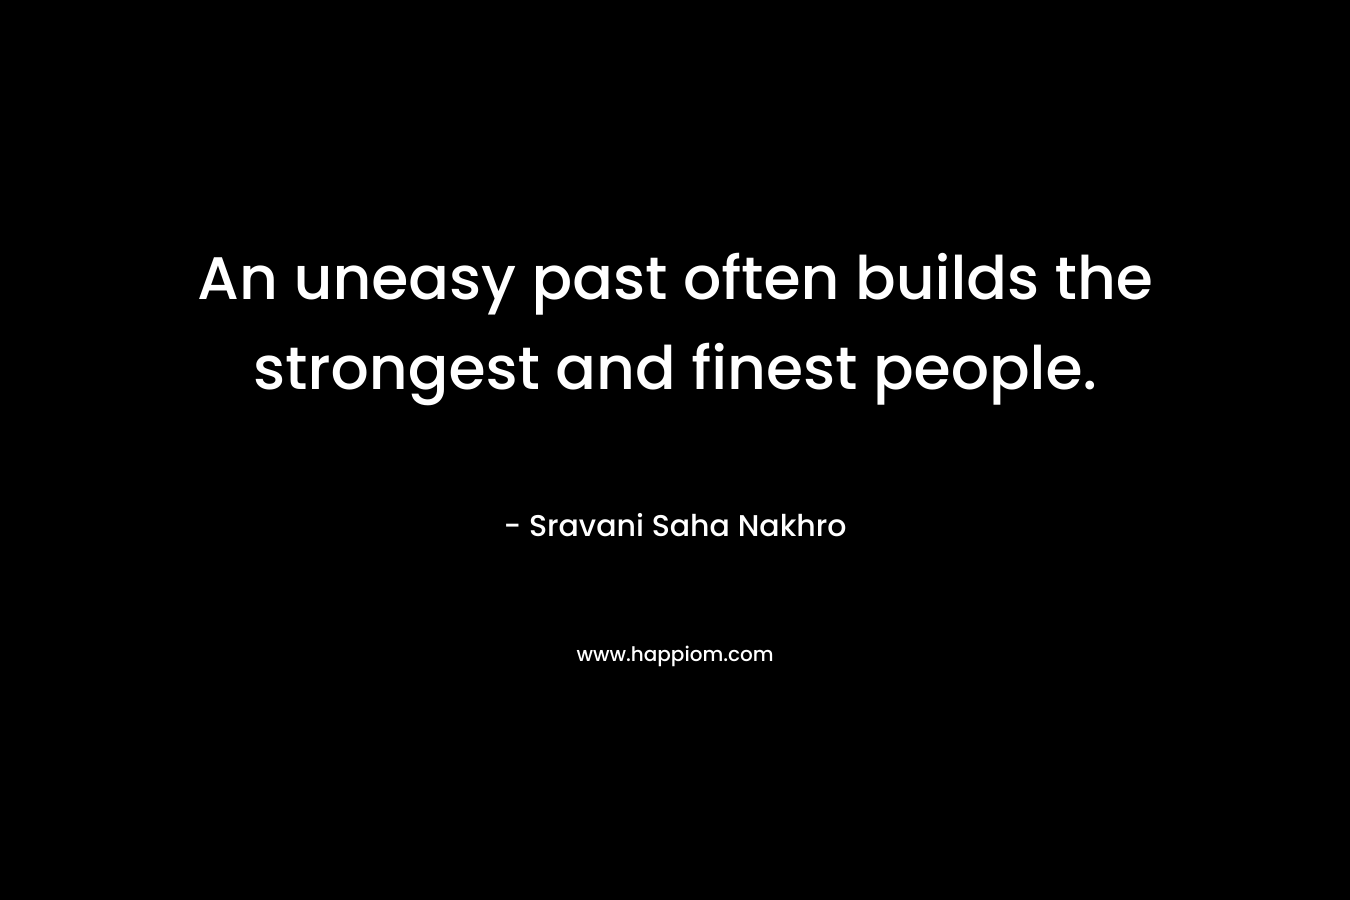 An uneasy past often builds the strongest and finest people.